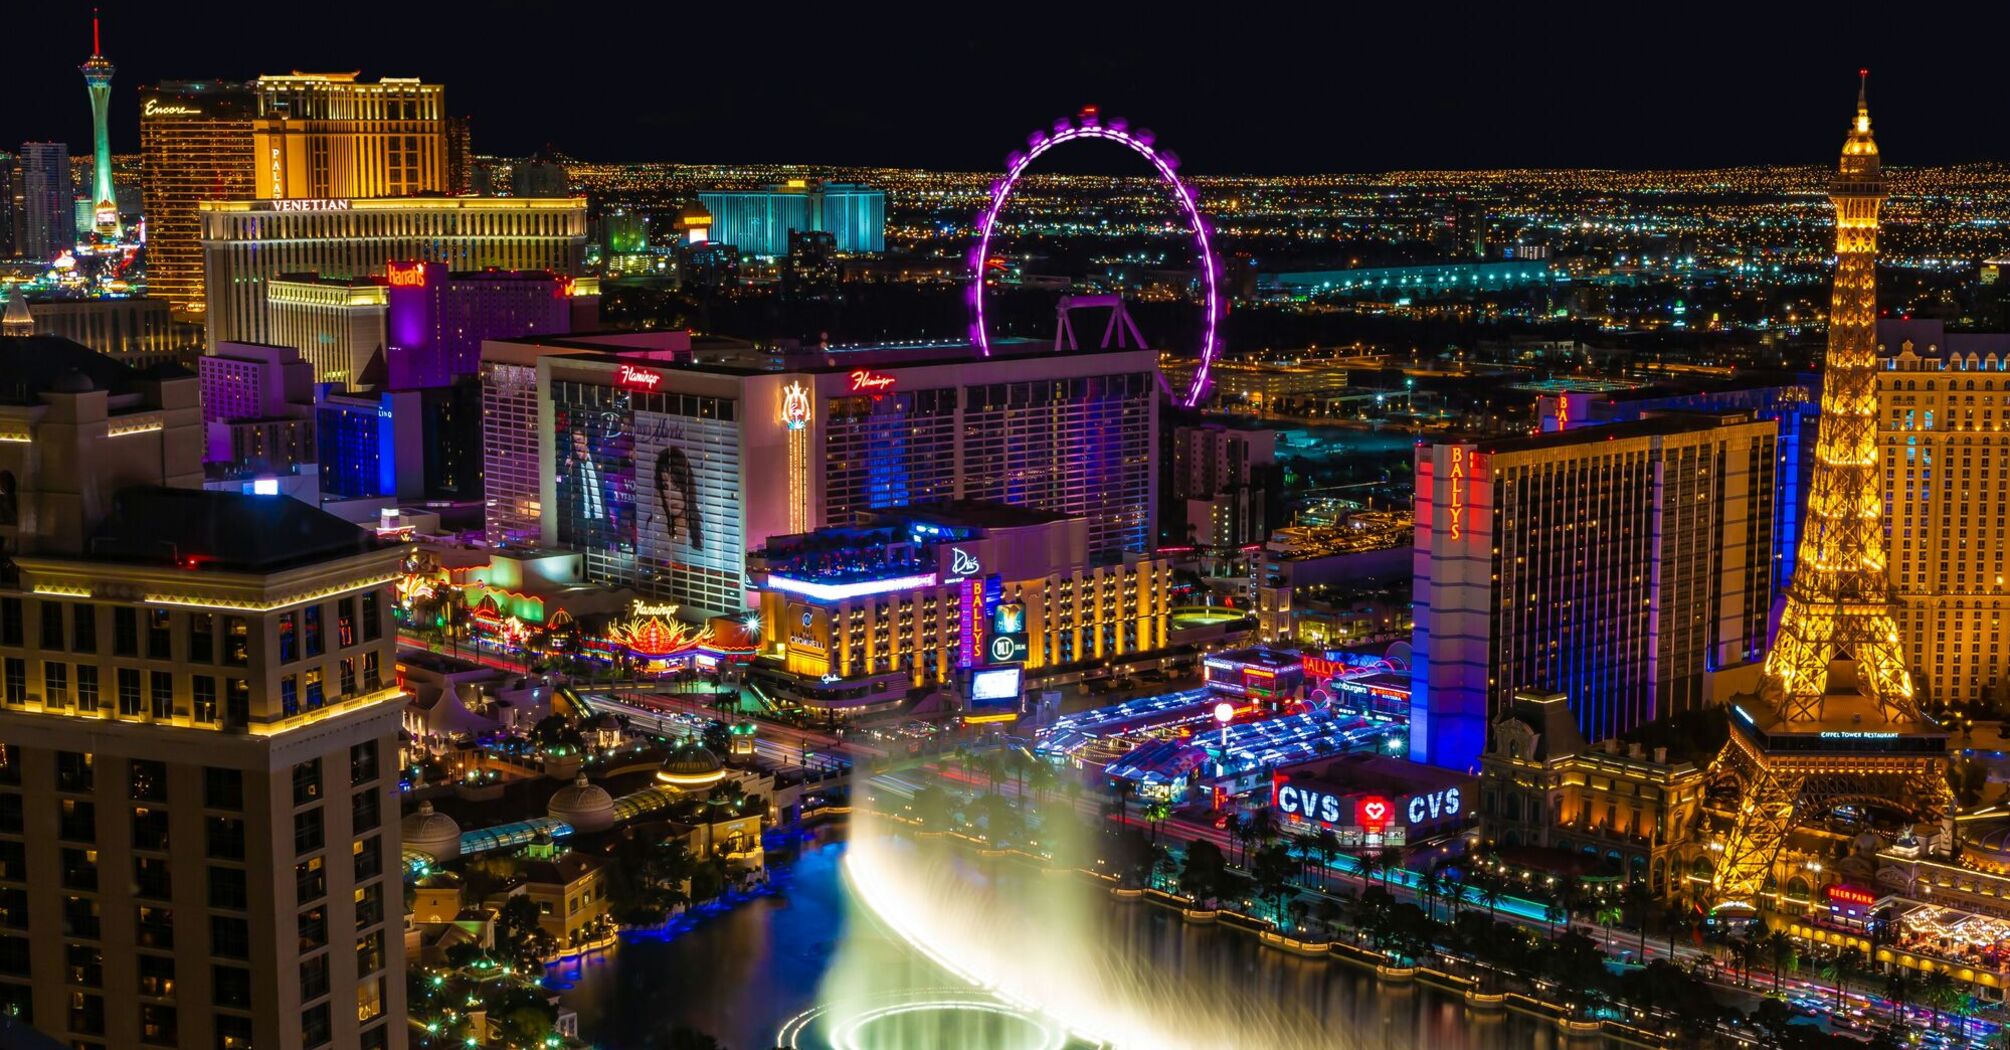 Night view of the Las Vegas Strip with illuminated landmarks and fountain show